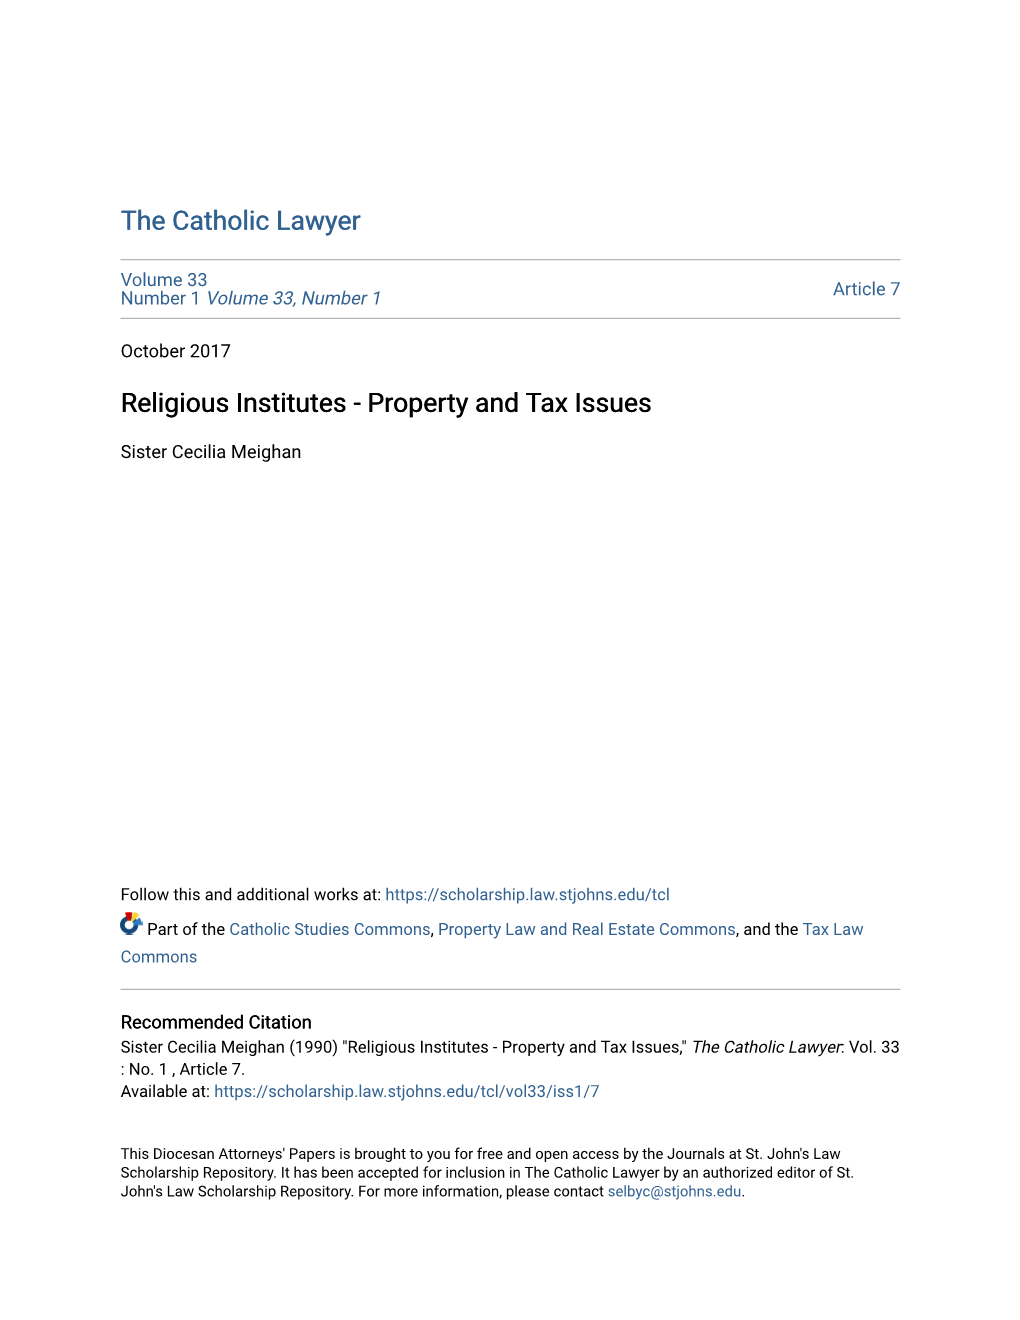 Religious Institutes - Property and Tax Issues